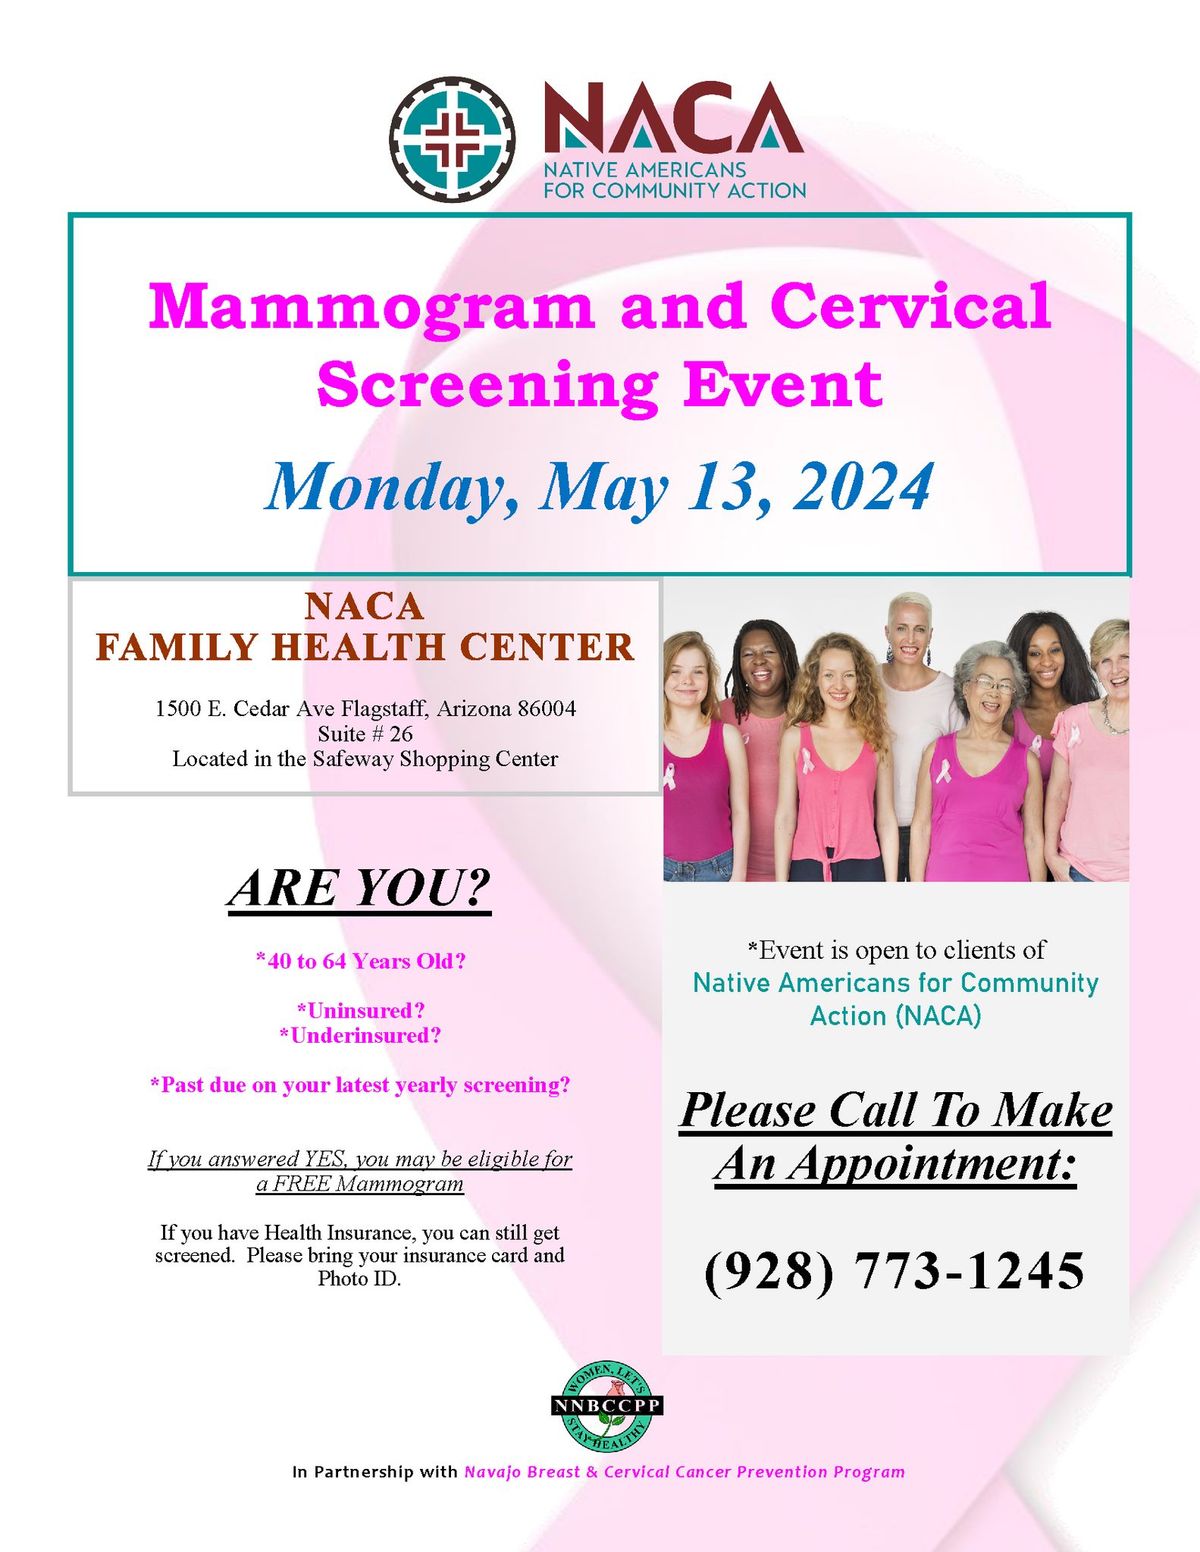 Mammogram and Cervical Screening Event